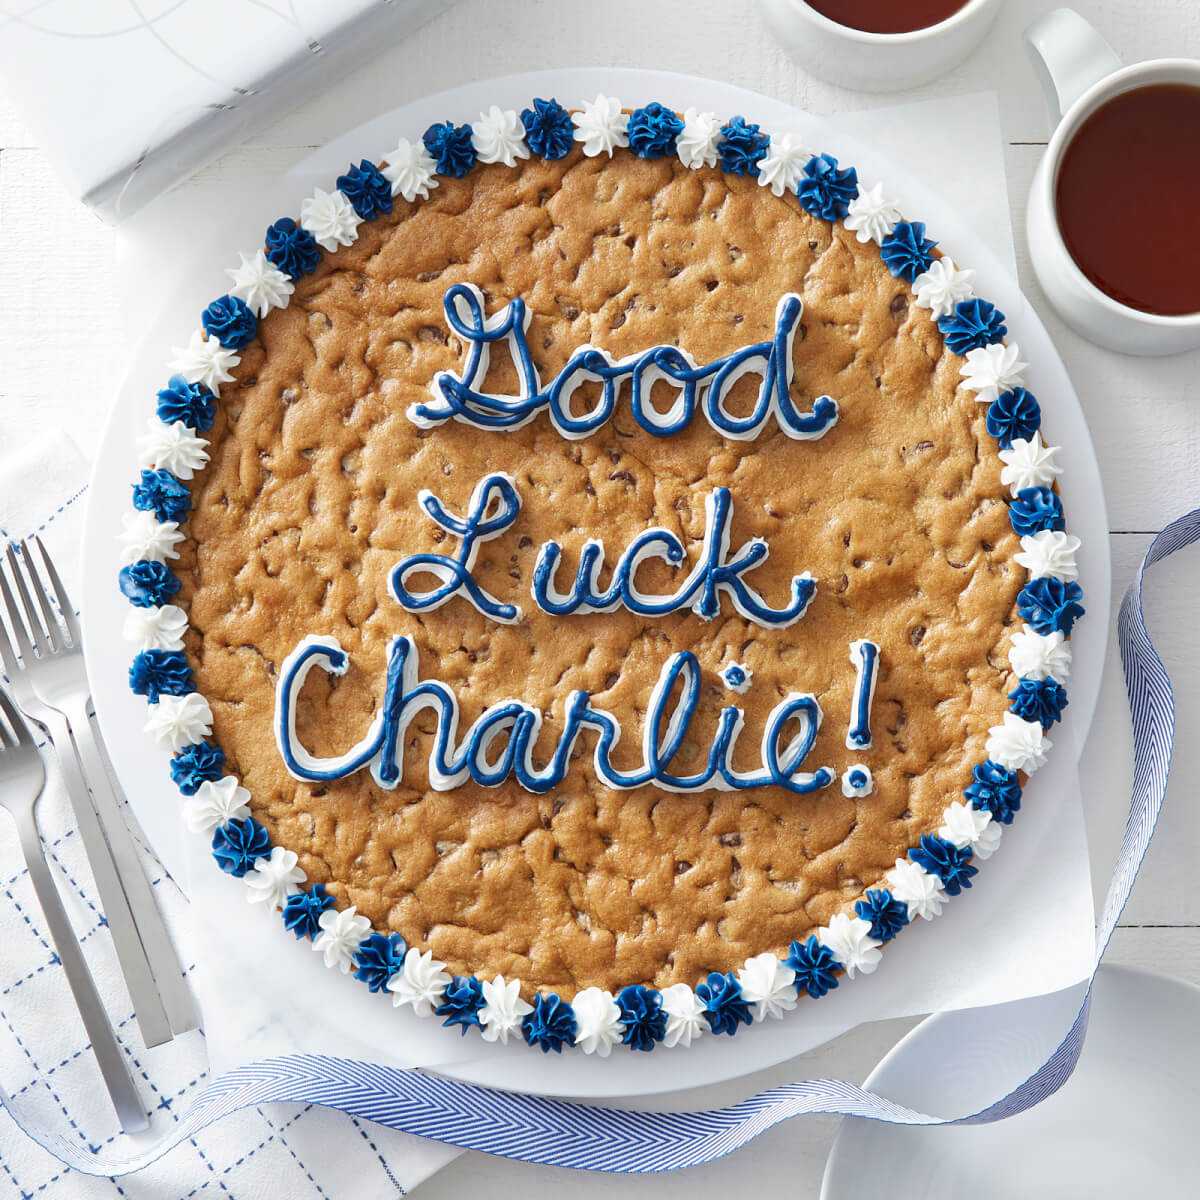 Custom cookie cake with "Good Luck Charlie!" written in blue and white frosting